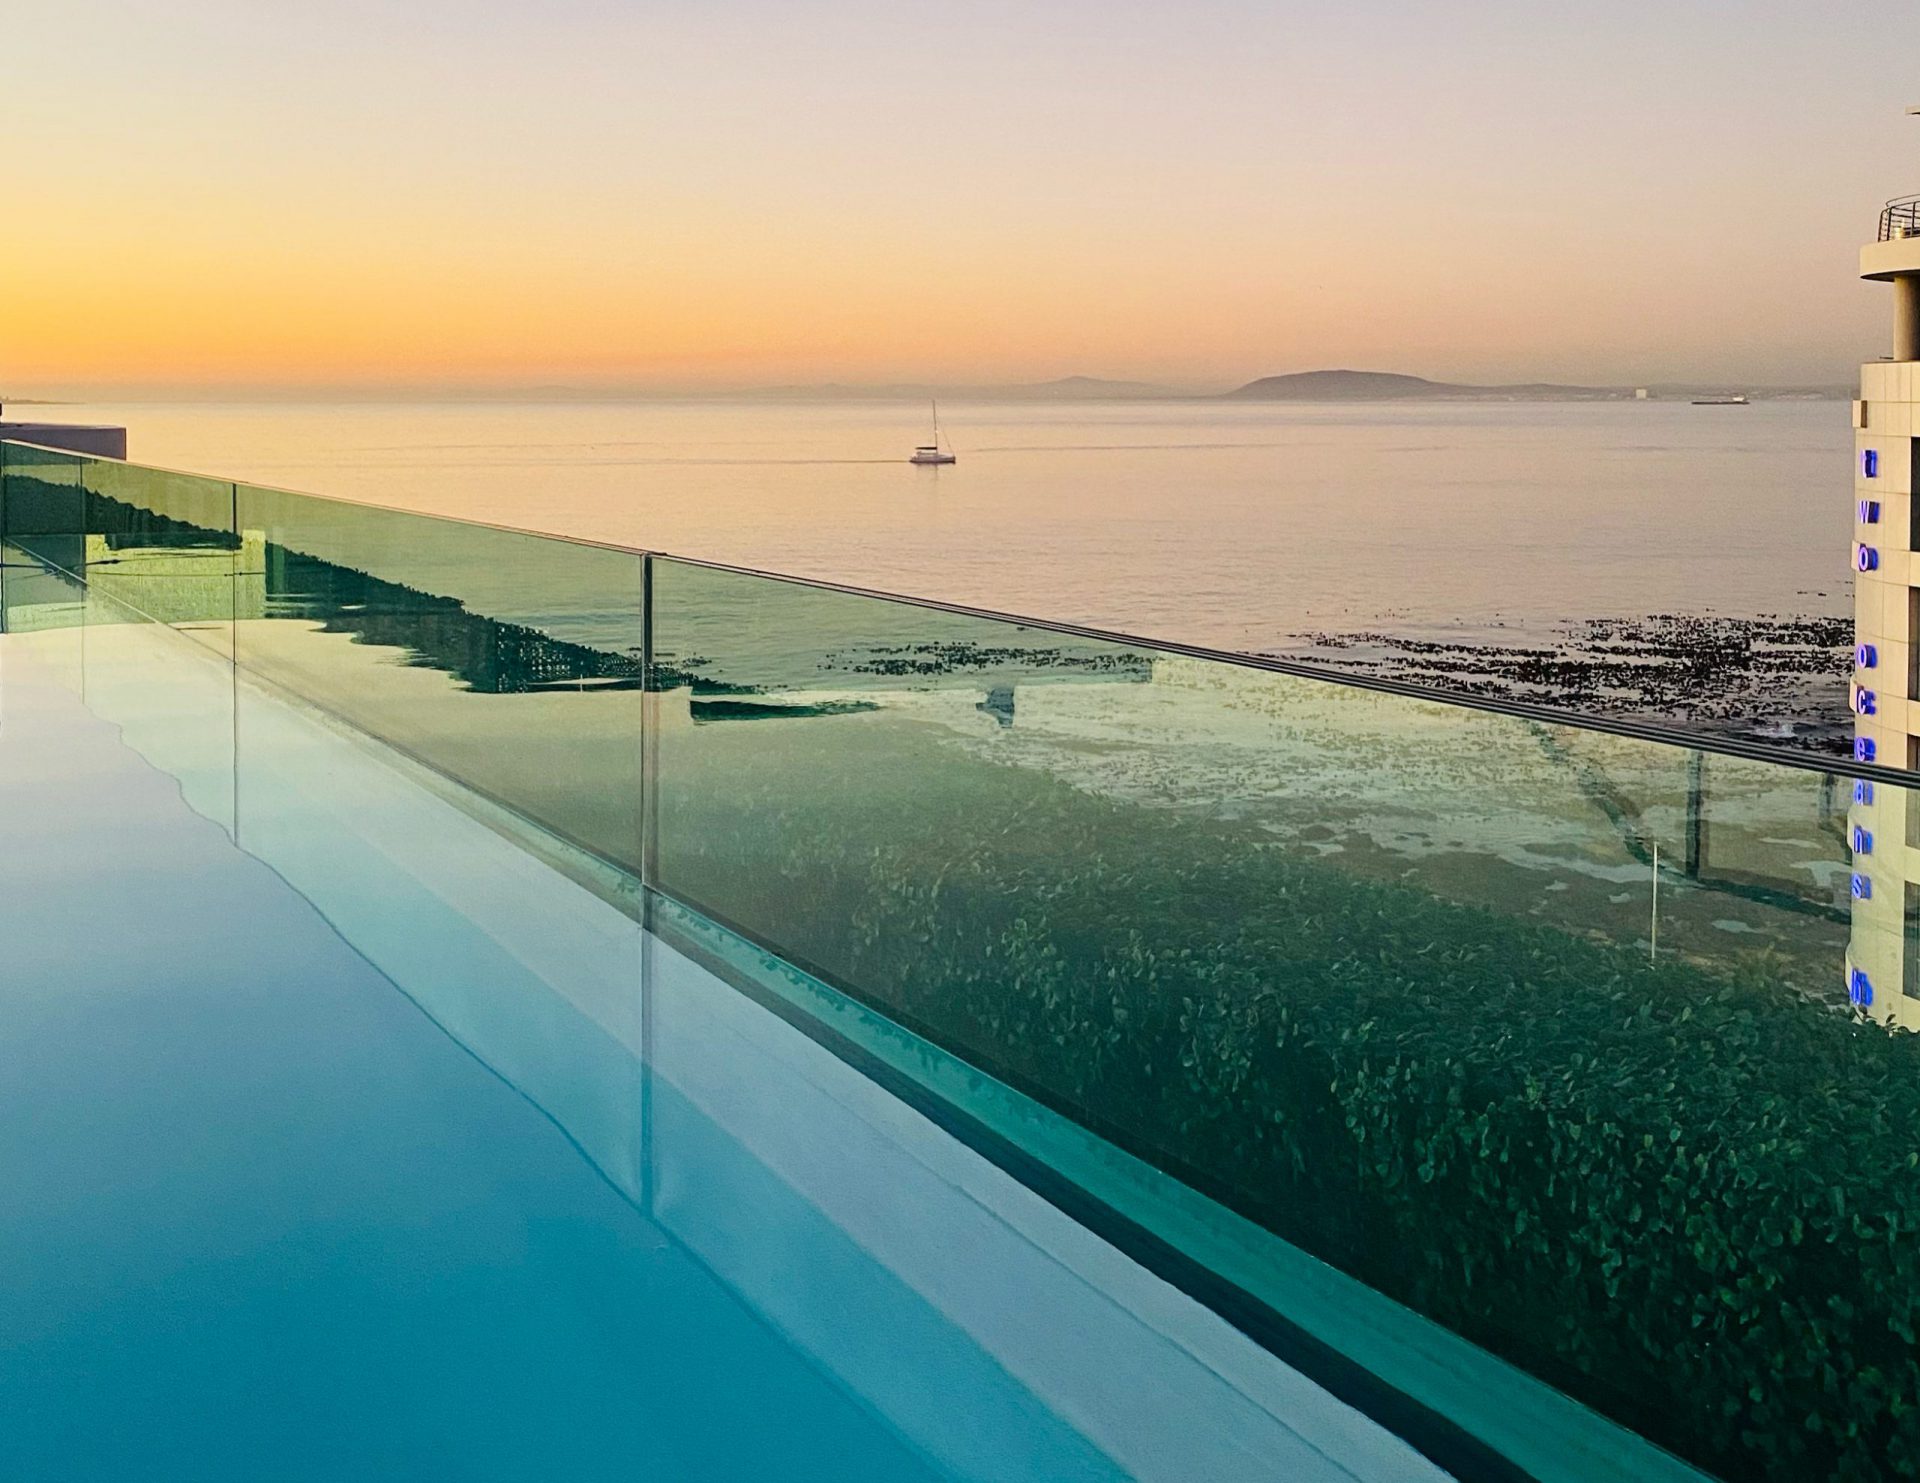 A view of a sunset over the ocean from a long, clear blue pool bordered by a transparent green glass screen.